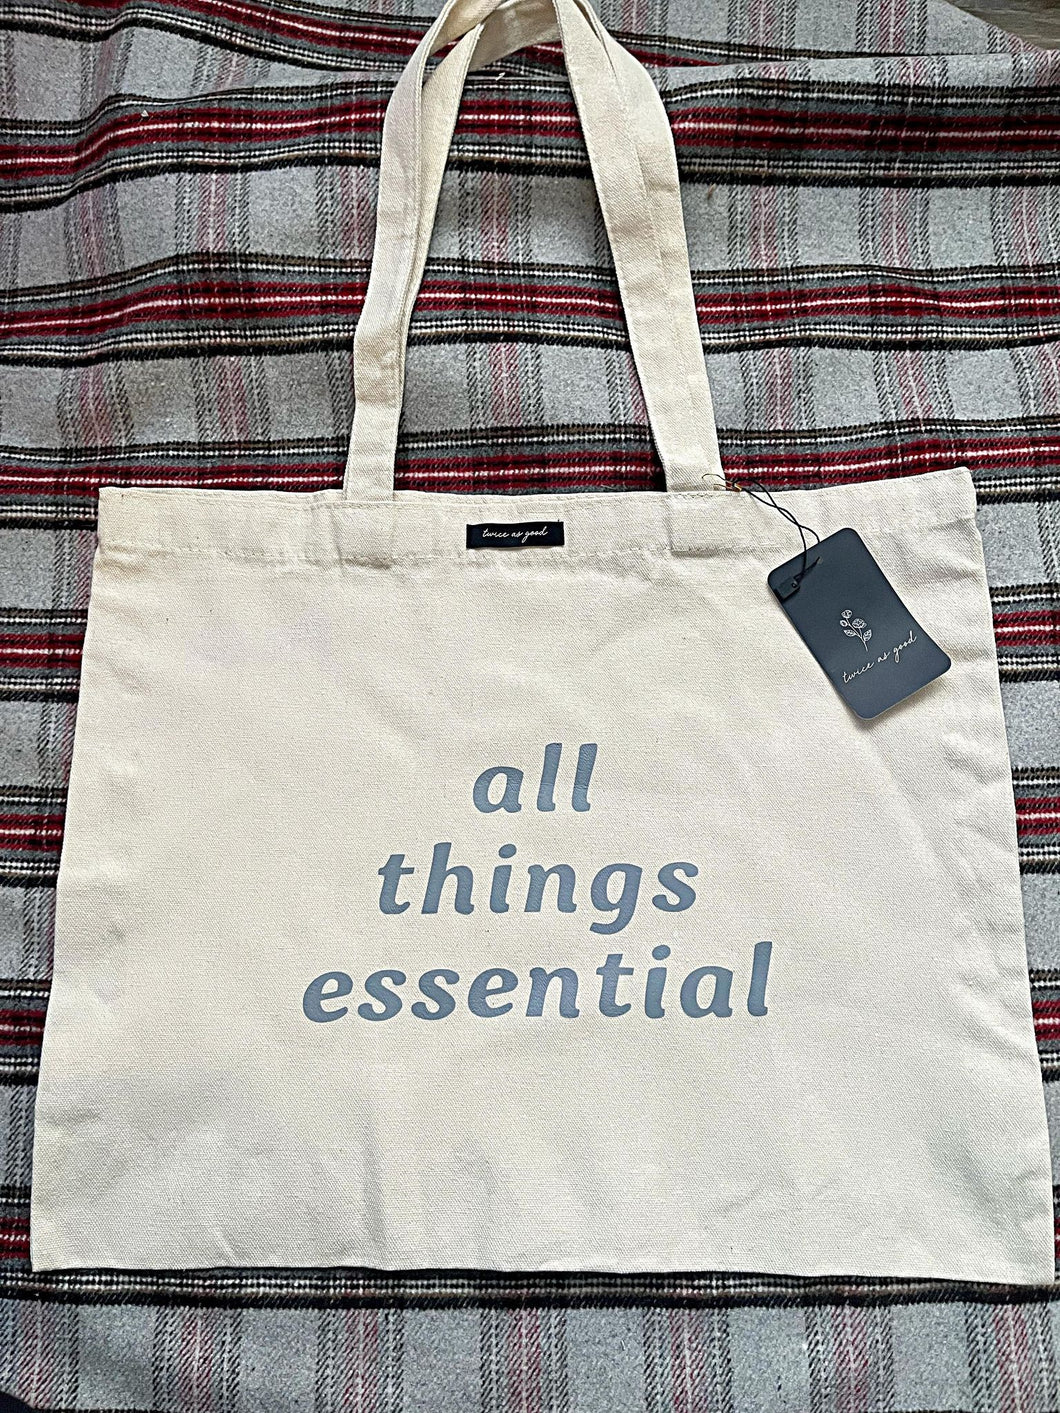 All things essential - tote bag